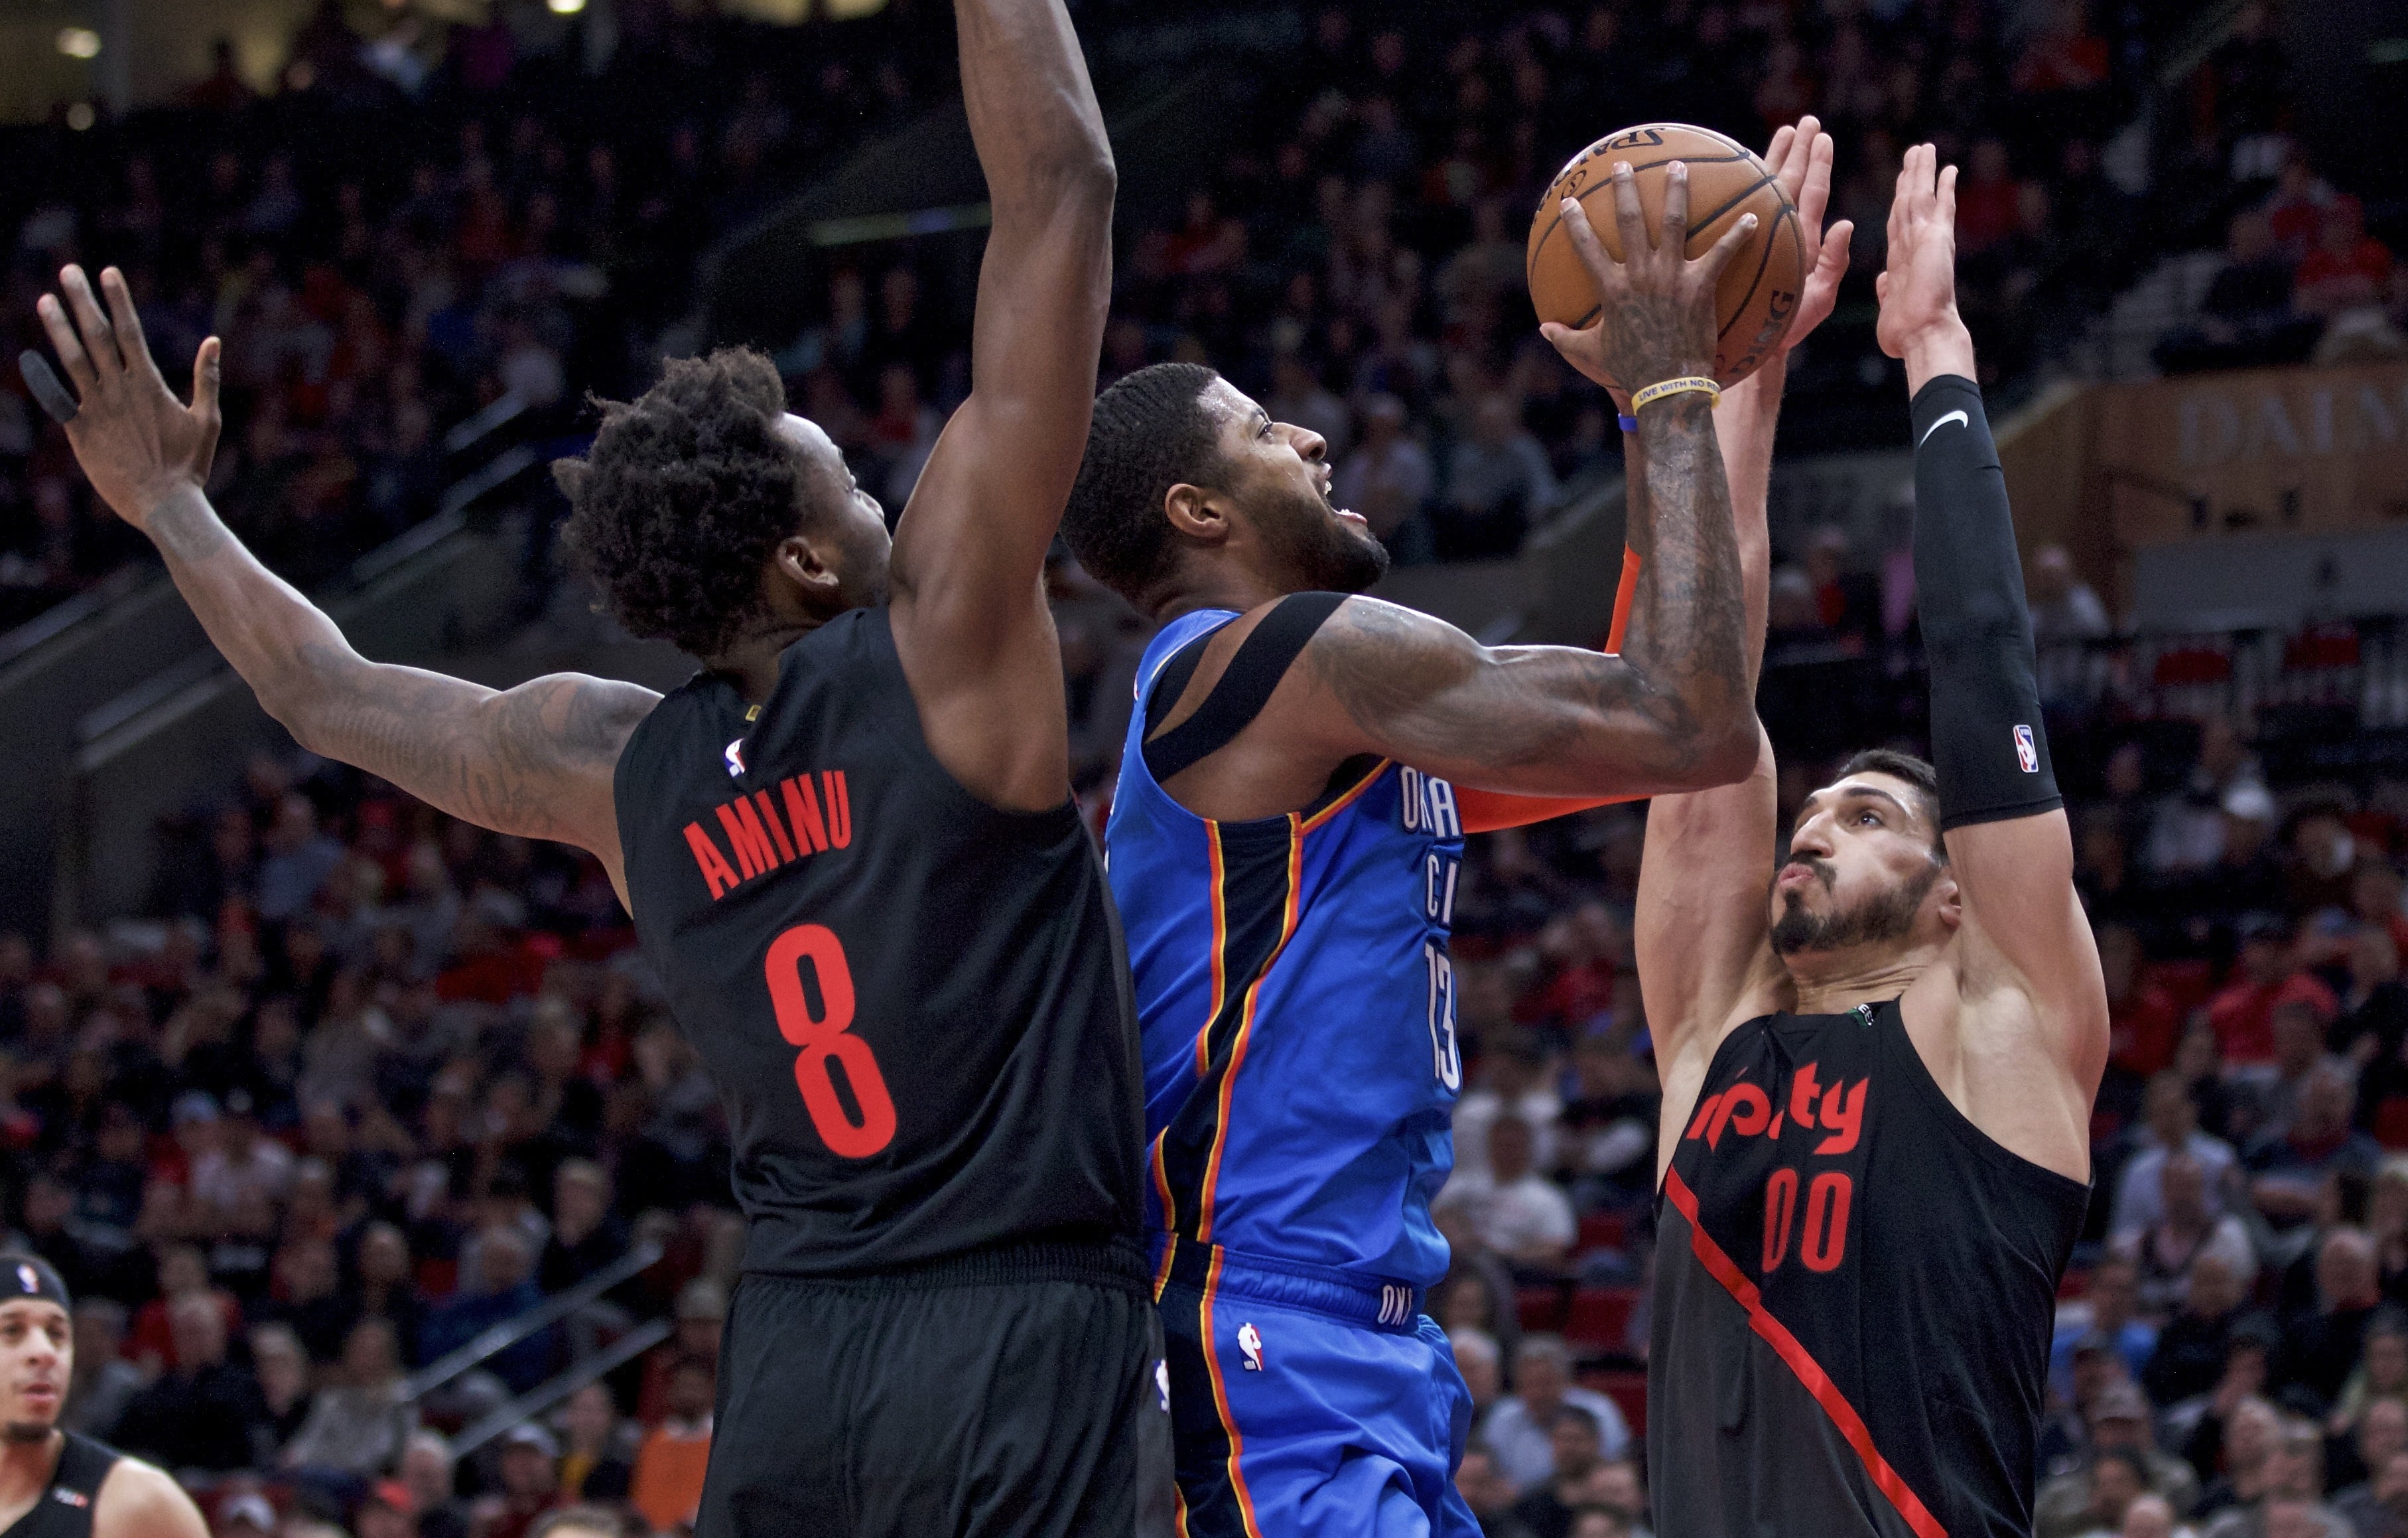 Oklahoma City Thunder forward Paul George, center, shoots between Portland Trail Blazers center Enes Kanter, right, and forward Al-Farouq Aminu during the first half of an NBA basketball game in Portland, Ore., Thursday, March 7, 2019.